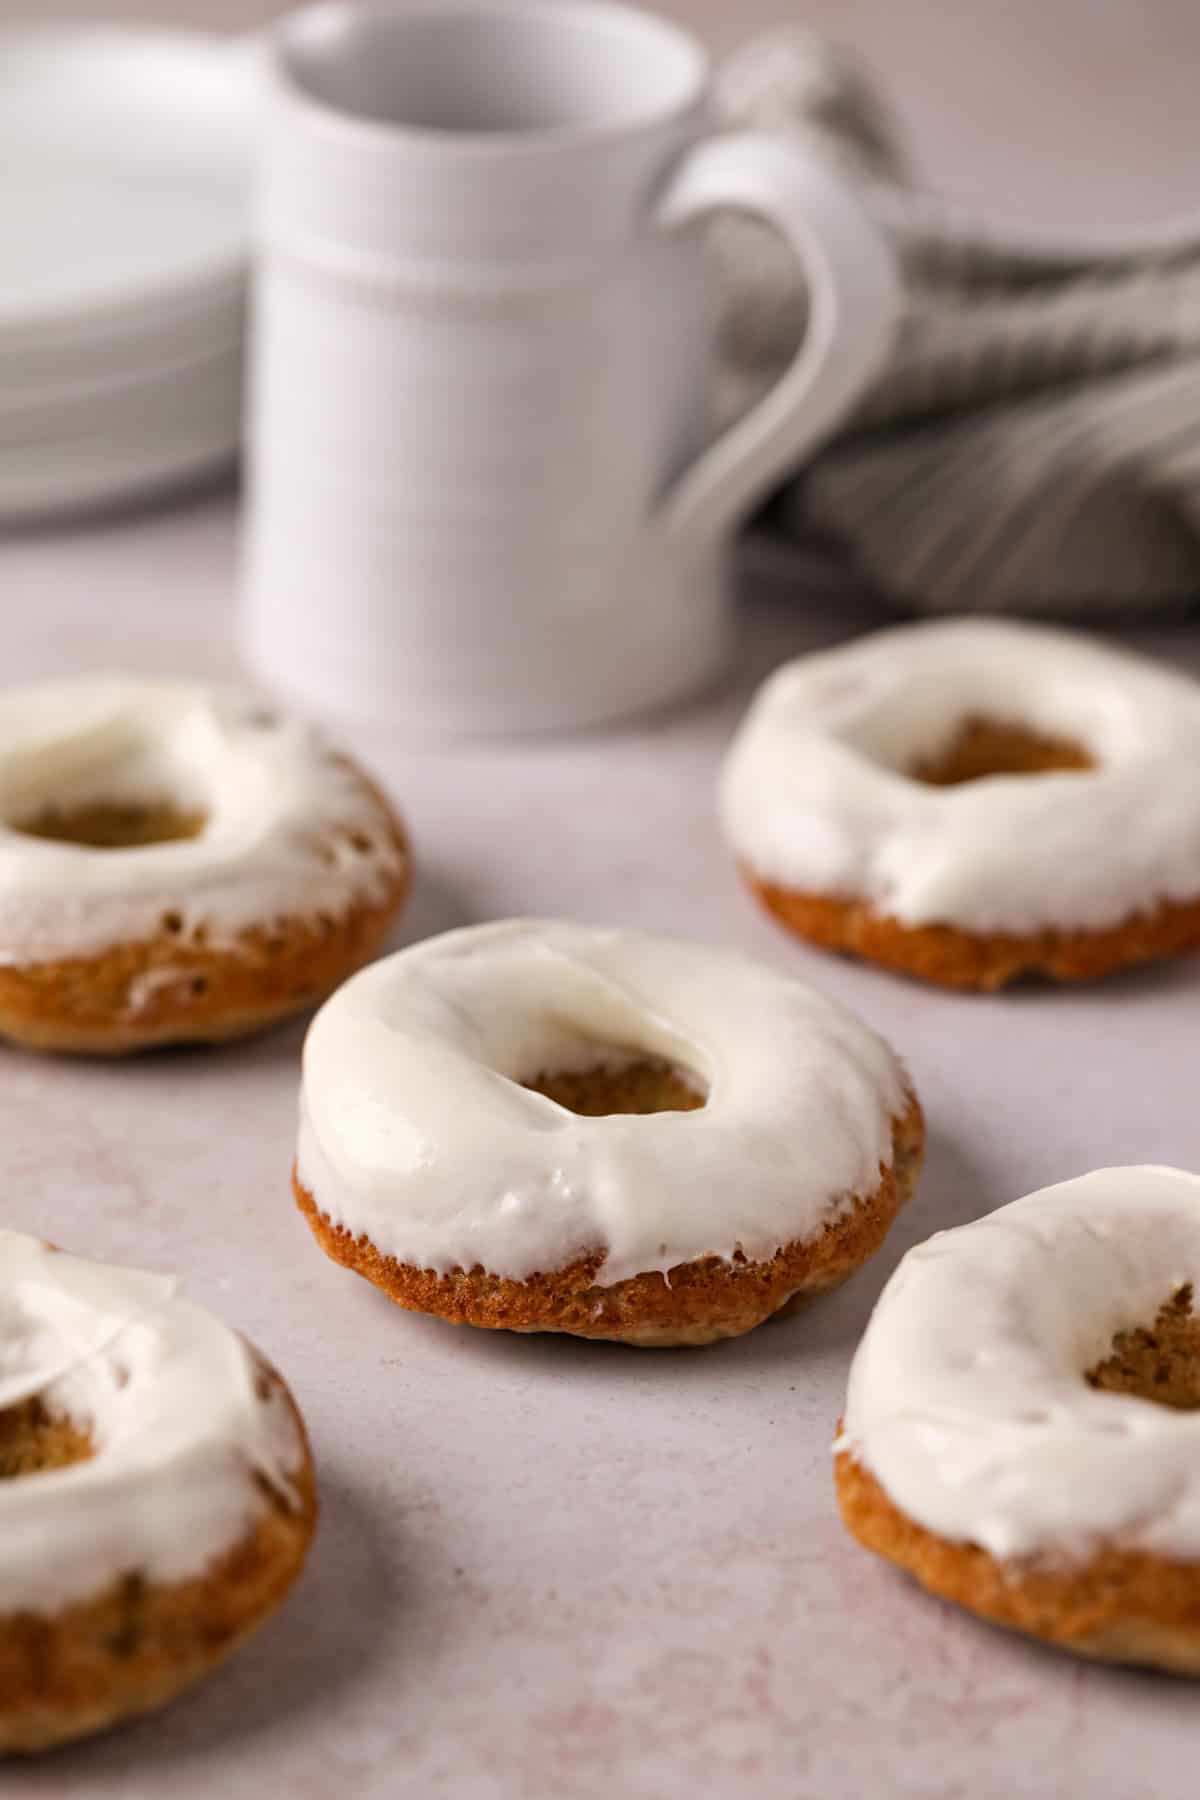 Cream cheese glazed baked banana donuts on a flat surface.